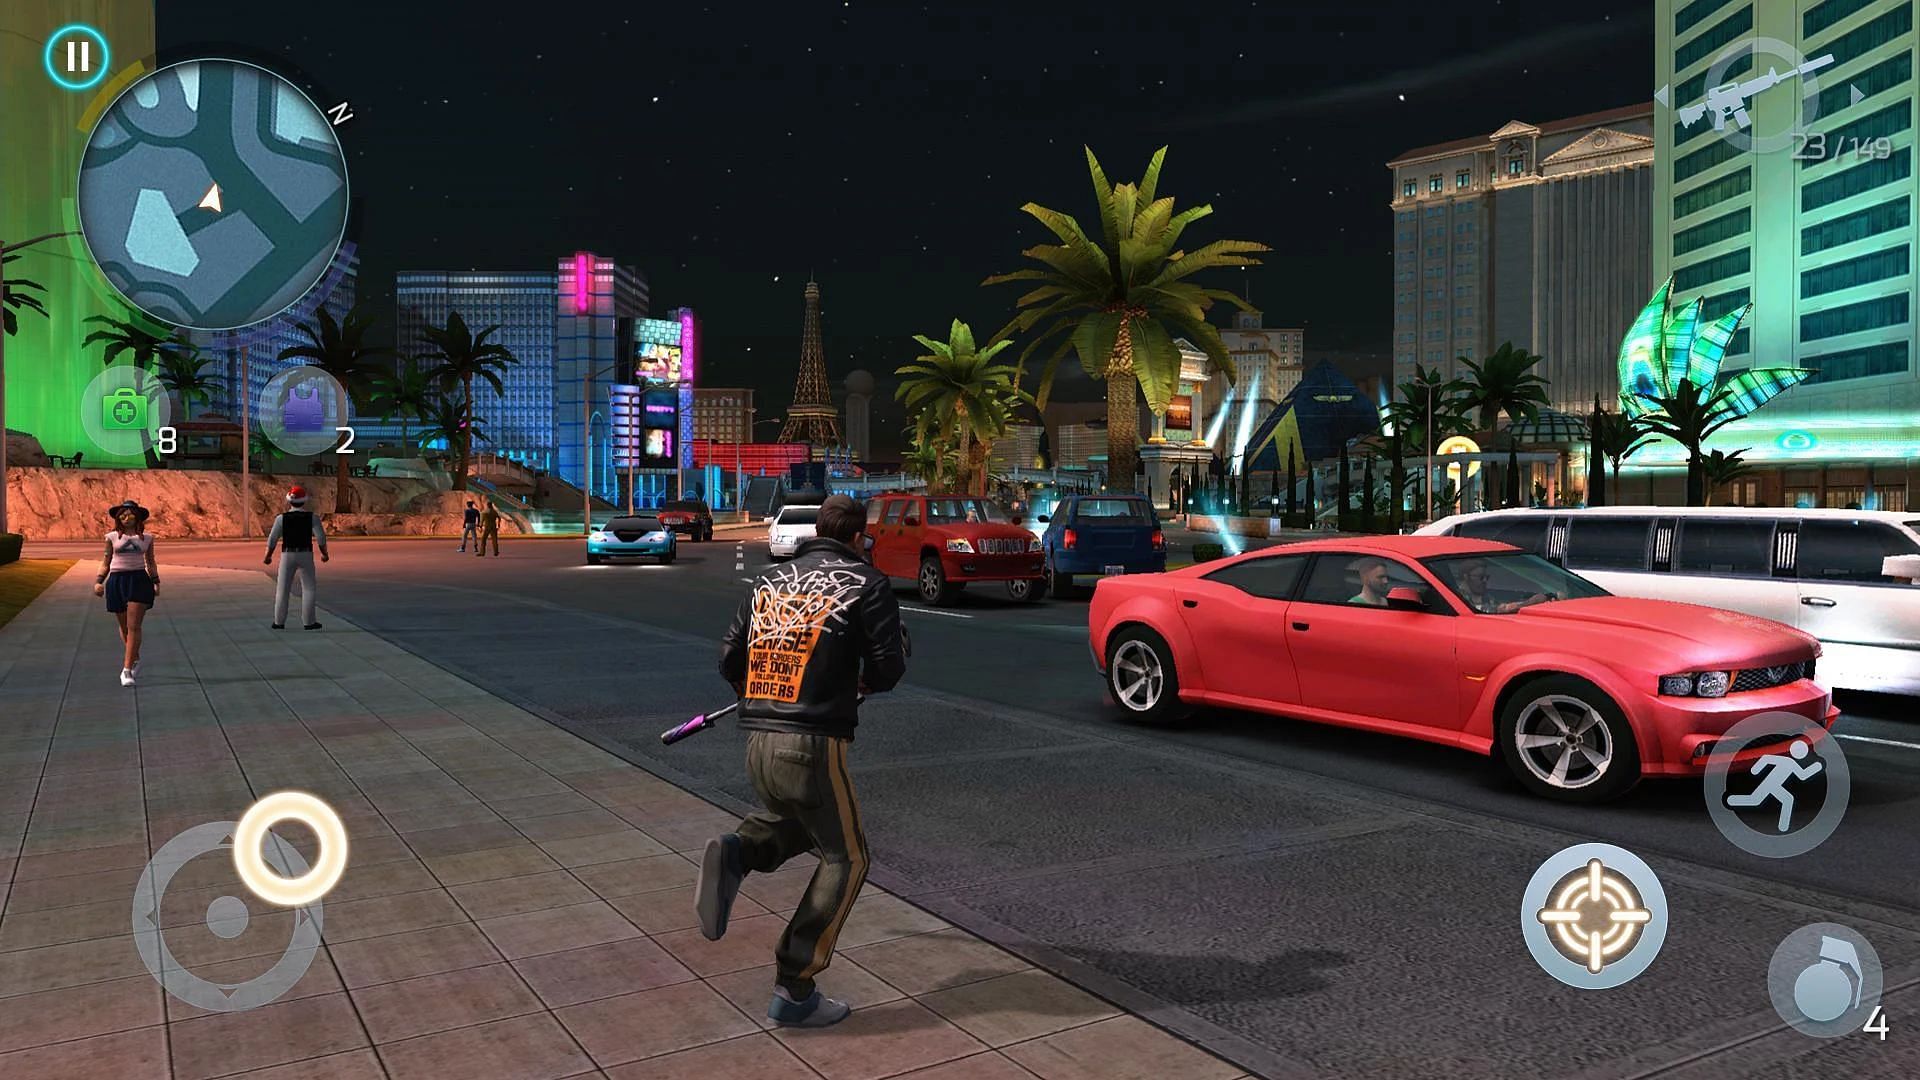 There are several GTA San Andreas-like free games for Android (image via play.google.com)